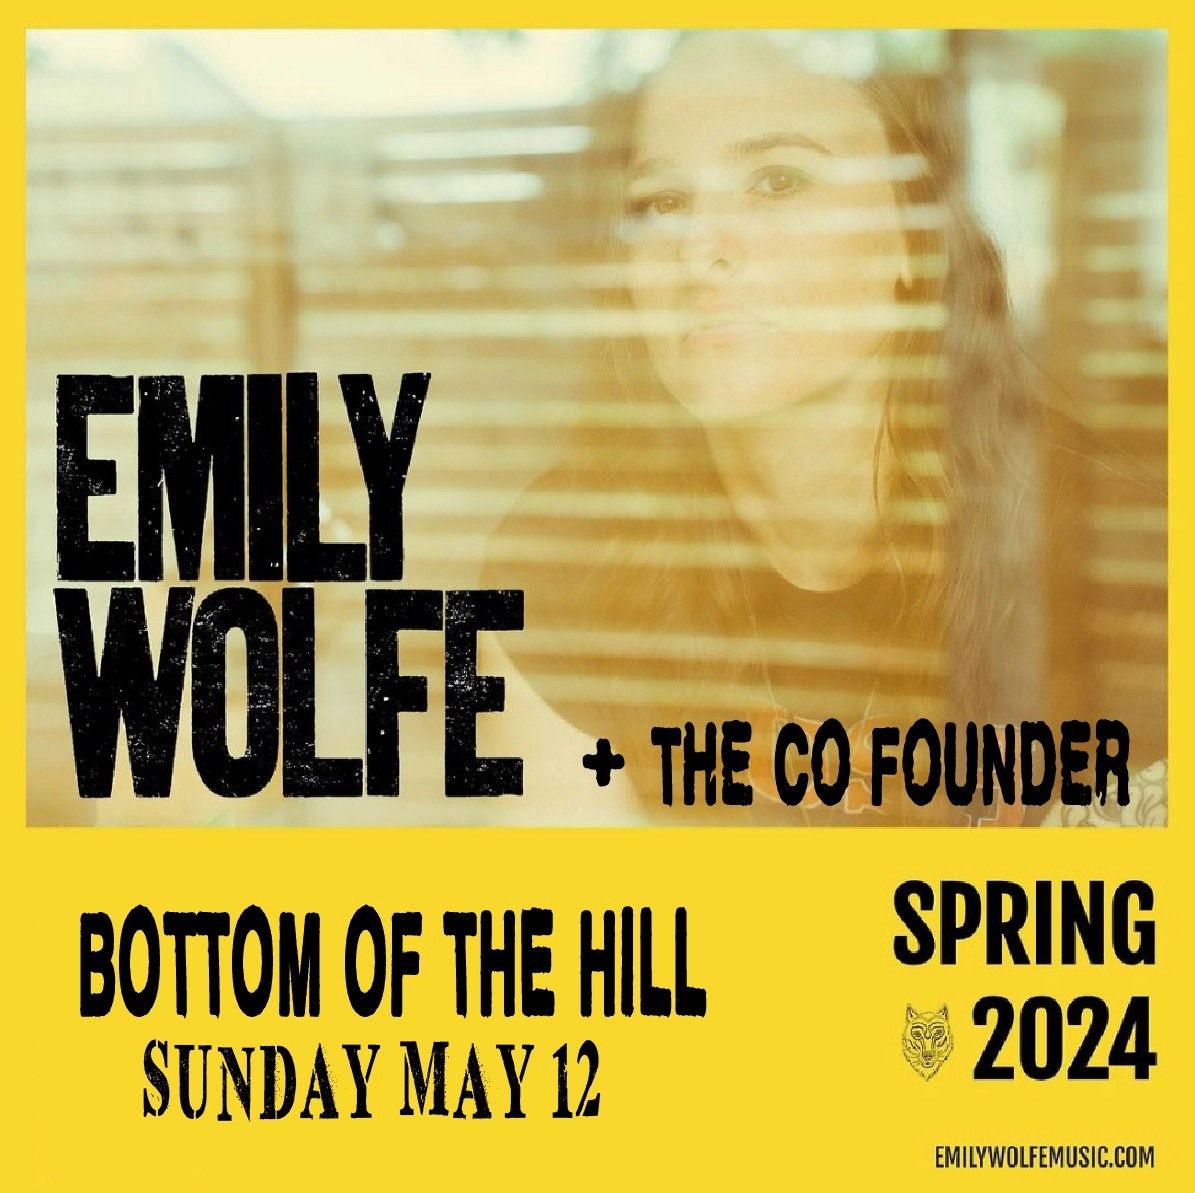 Emily Wolfe ~ The Co Founder